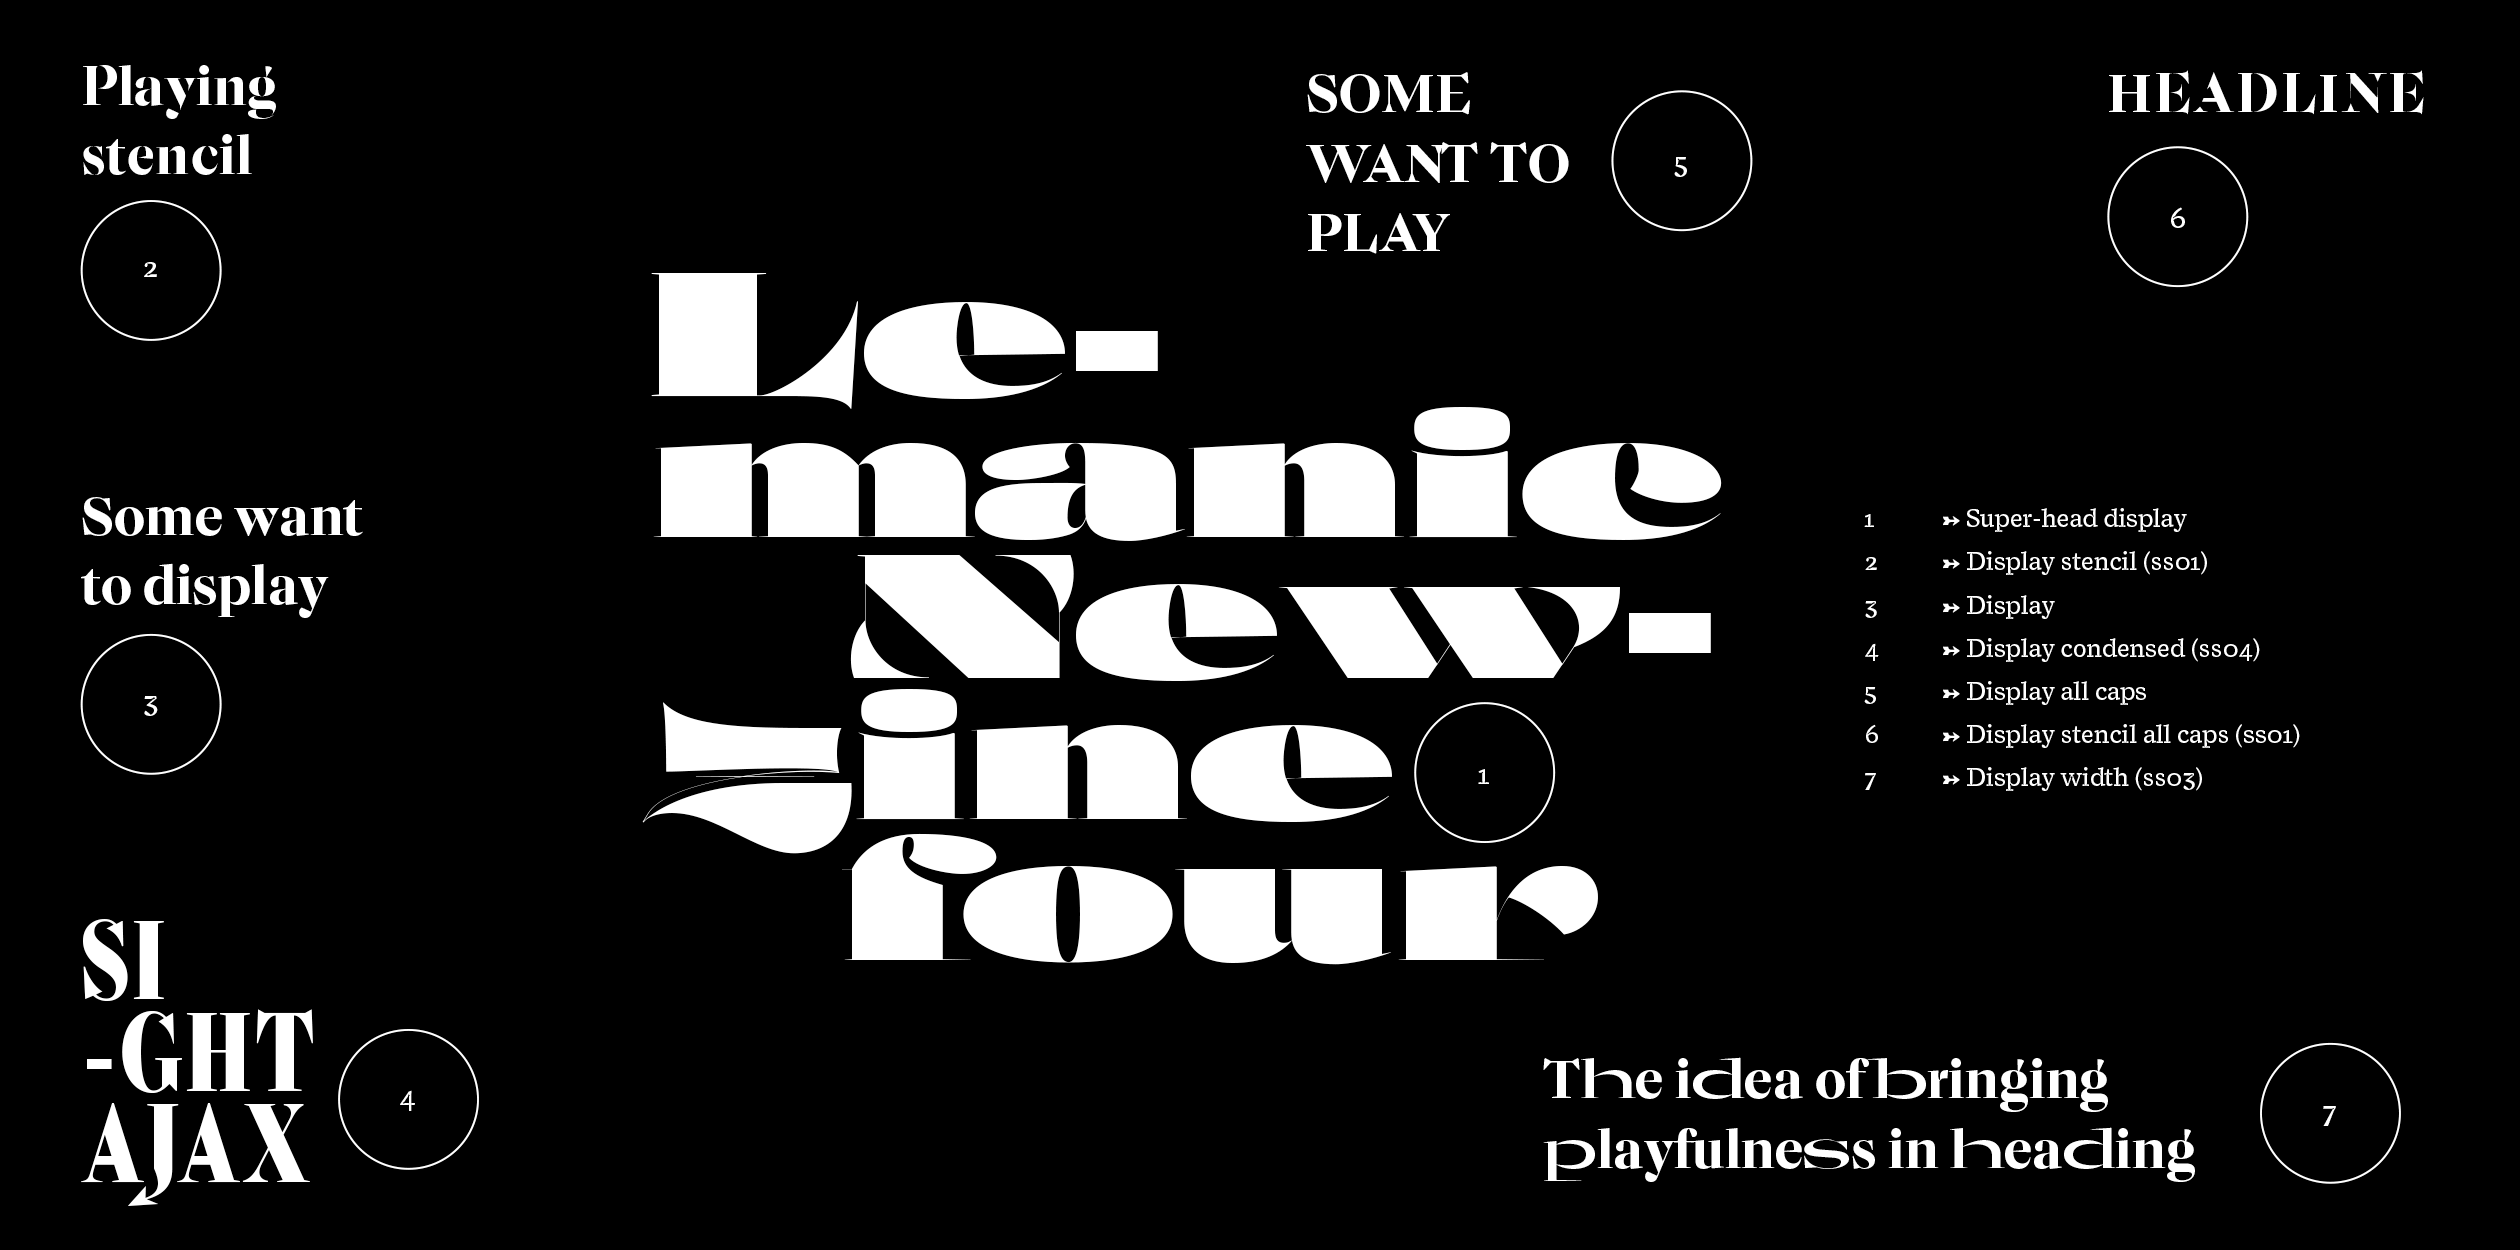 Image of Lemanic typeface project from Loris Olivier